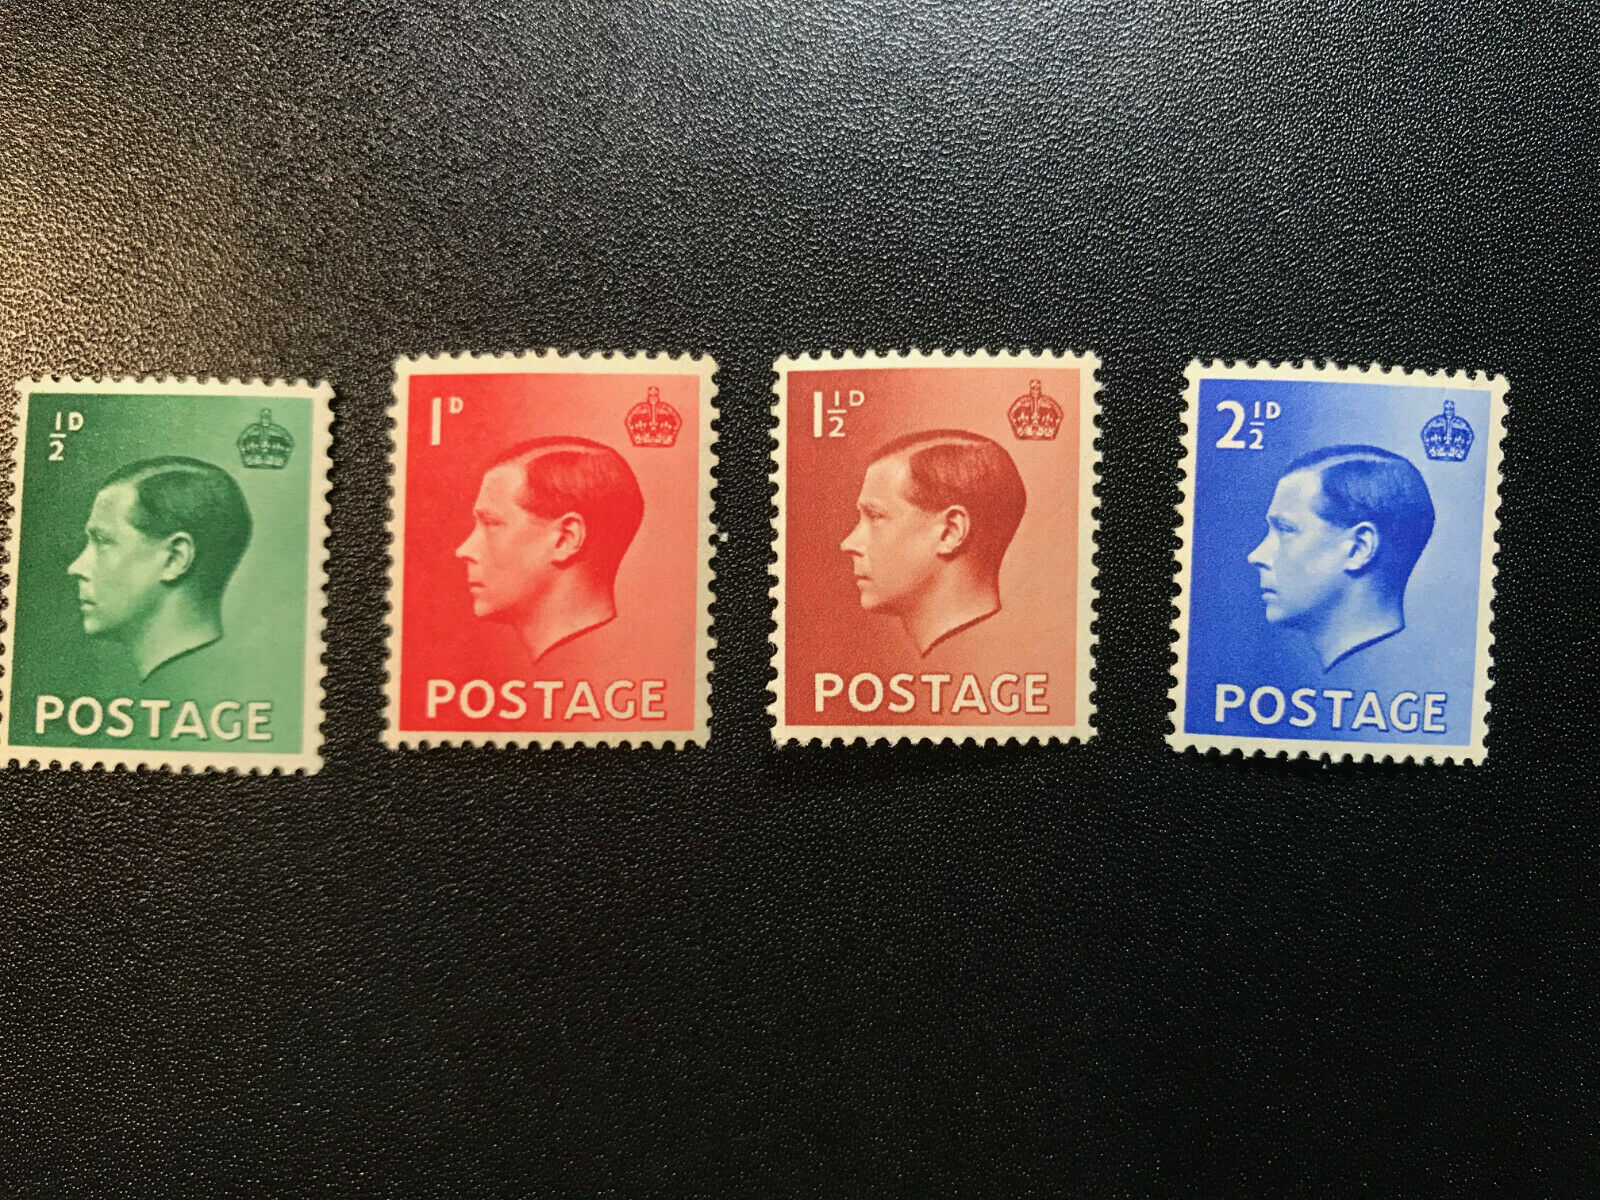 Gb Greart Britain 1936 King Edward Viii Sg 457- 460 Complete Set Stamps Mnh